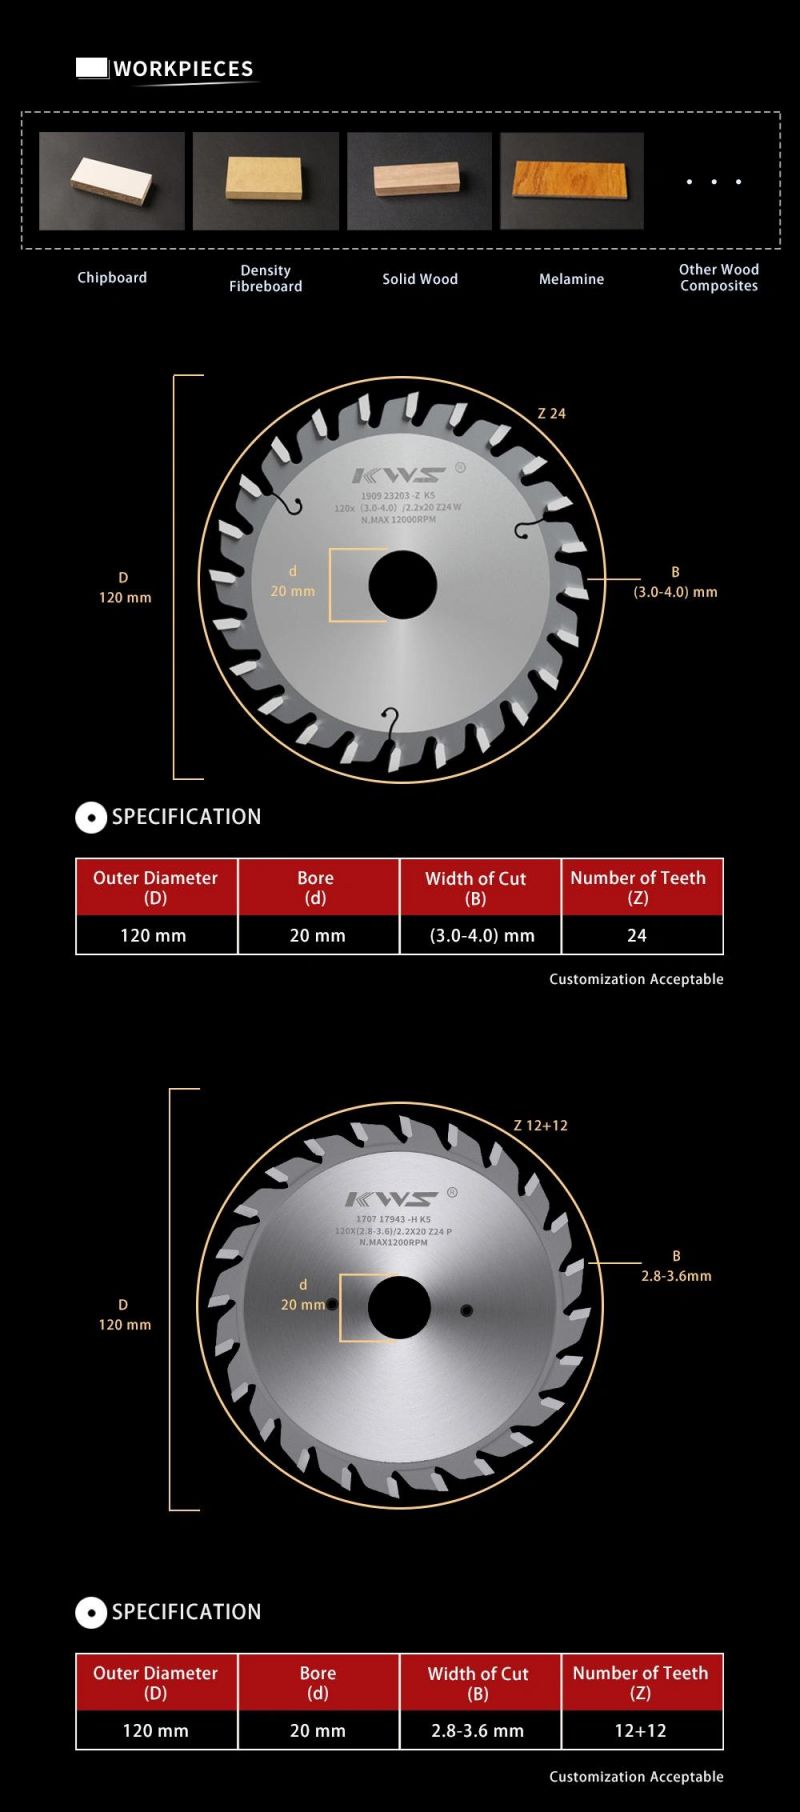 Tct Scoring Saw Blade for Woodworking